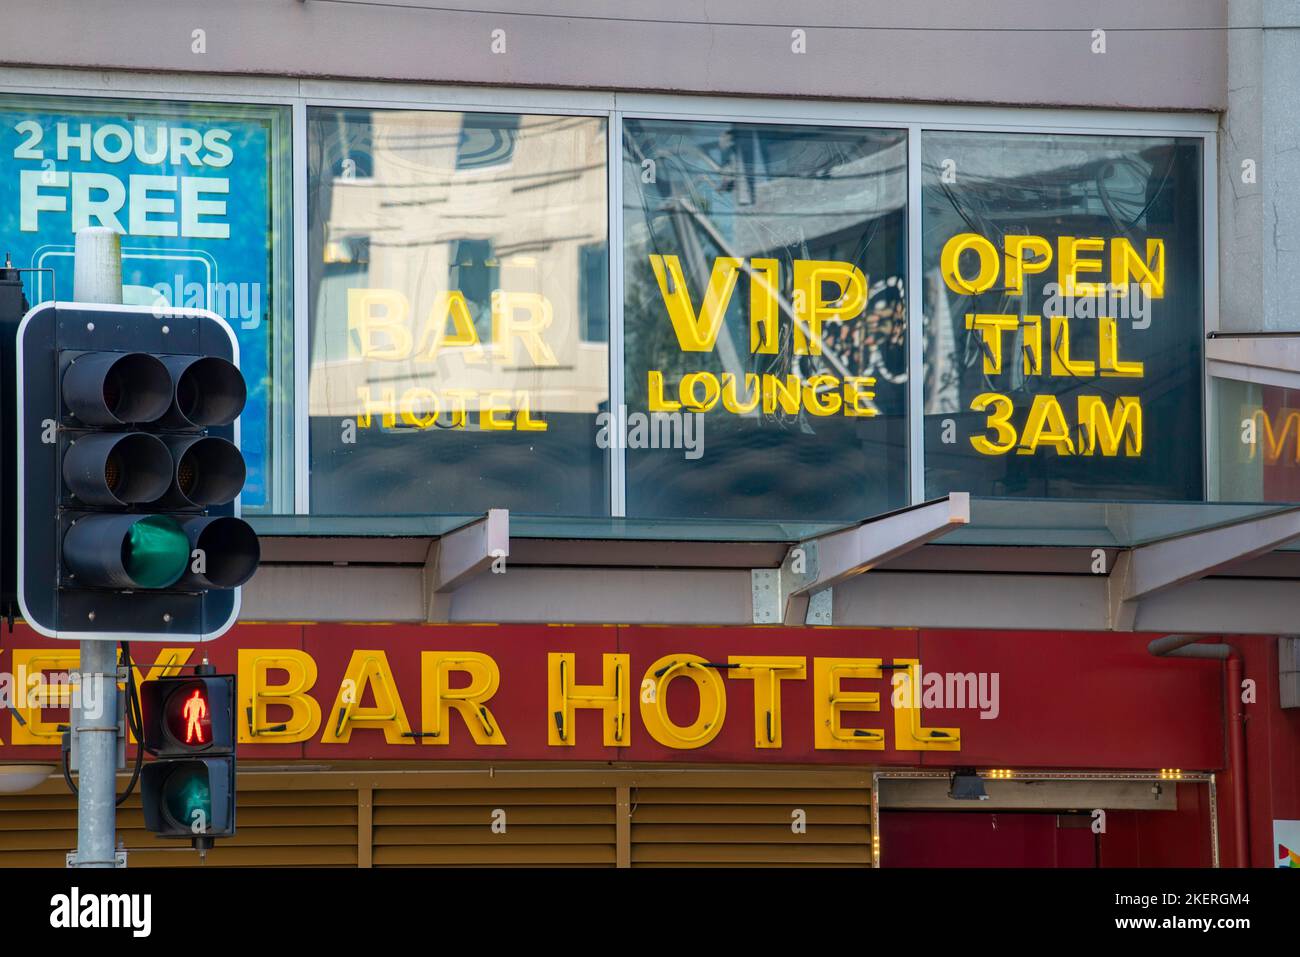 Unlit neon signs in the daytime advertising a Bar Hotel and VIP Lounge open late until 3am in Sydney, Australia Stock Photo